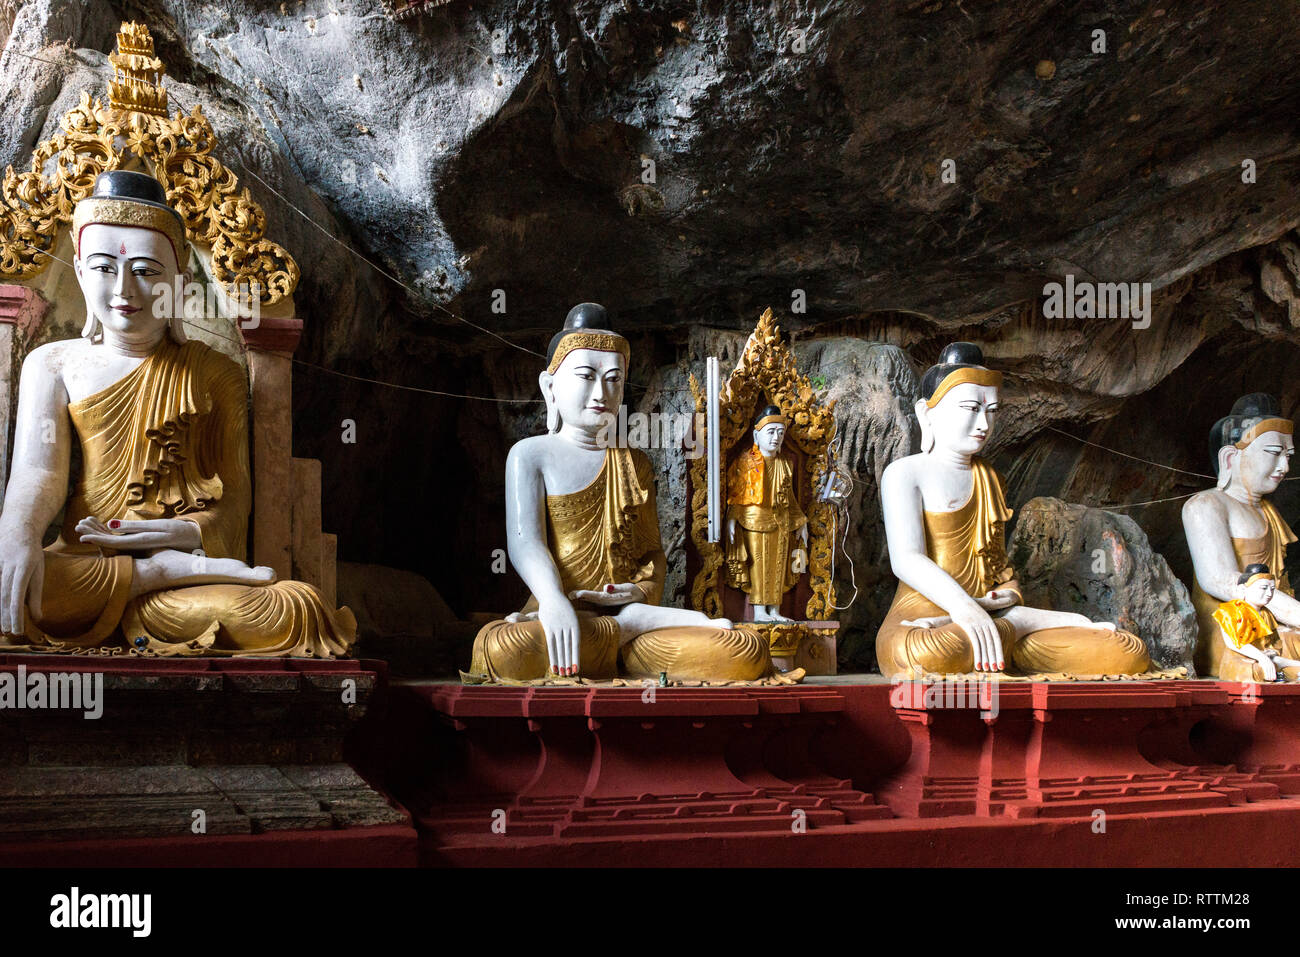 HPA-AN, MYANMAR - 19 NOVEMBER, 2018: Horizontal picture of Buddha statues in the interior of Kaw Goon Cave, landmark of Hpa-An, Myanmar Stock Photo